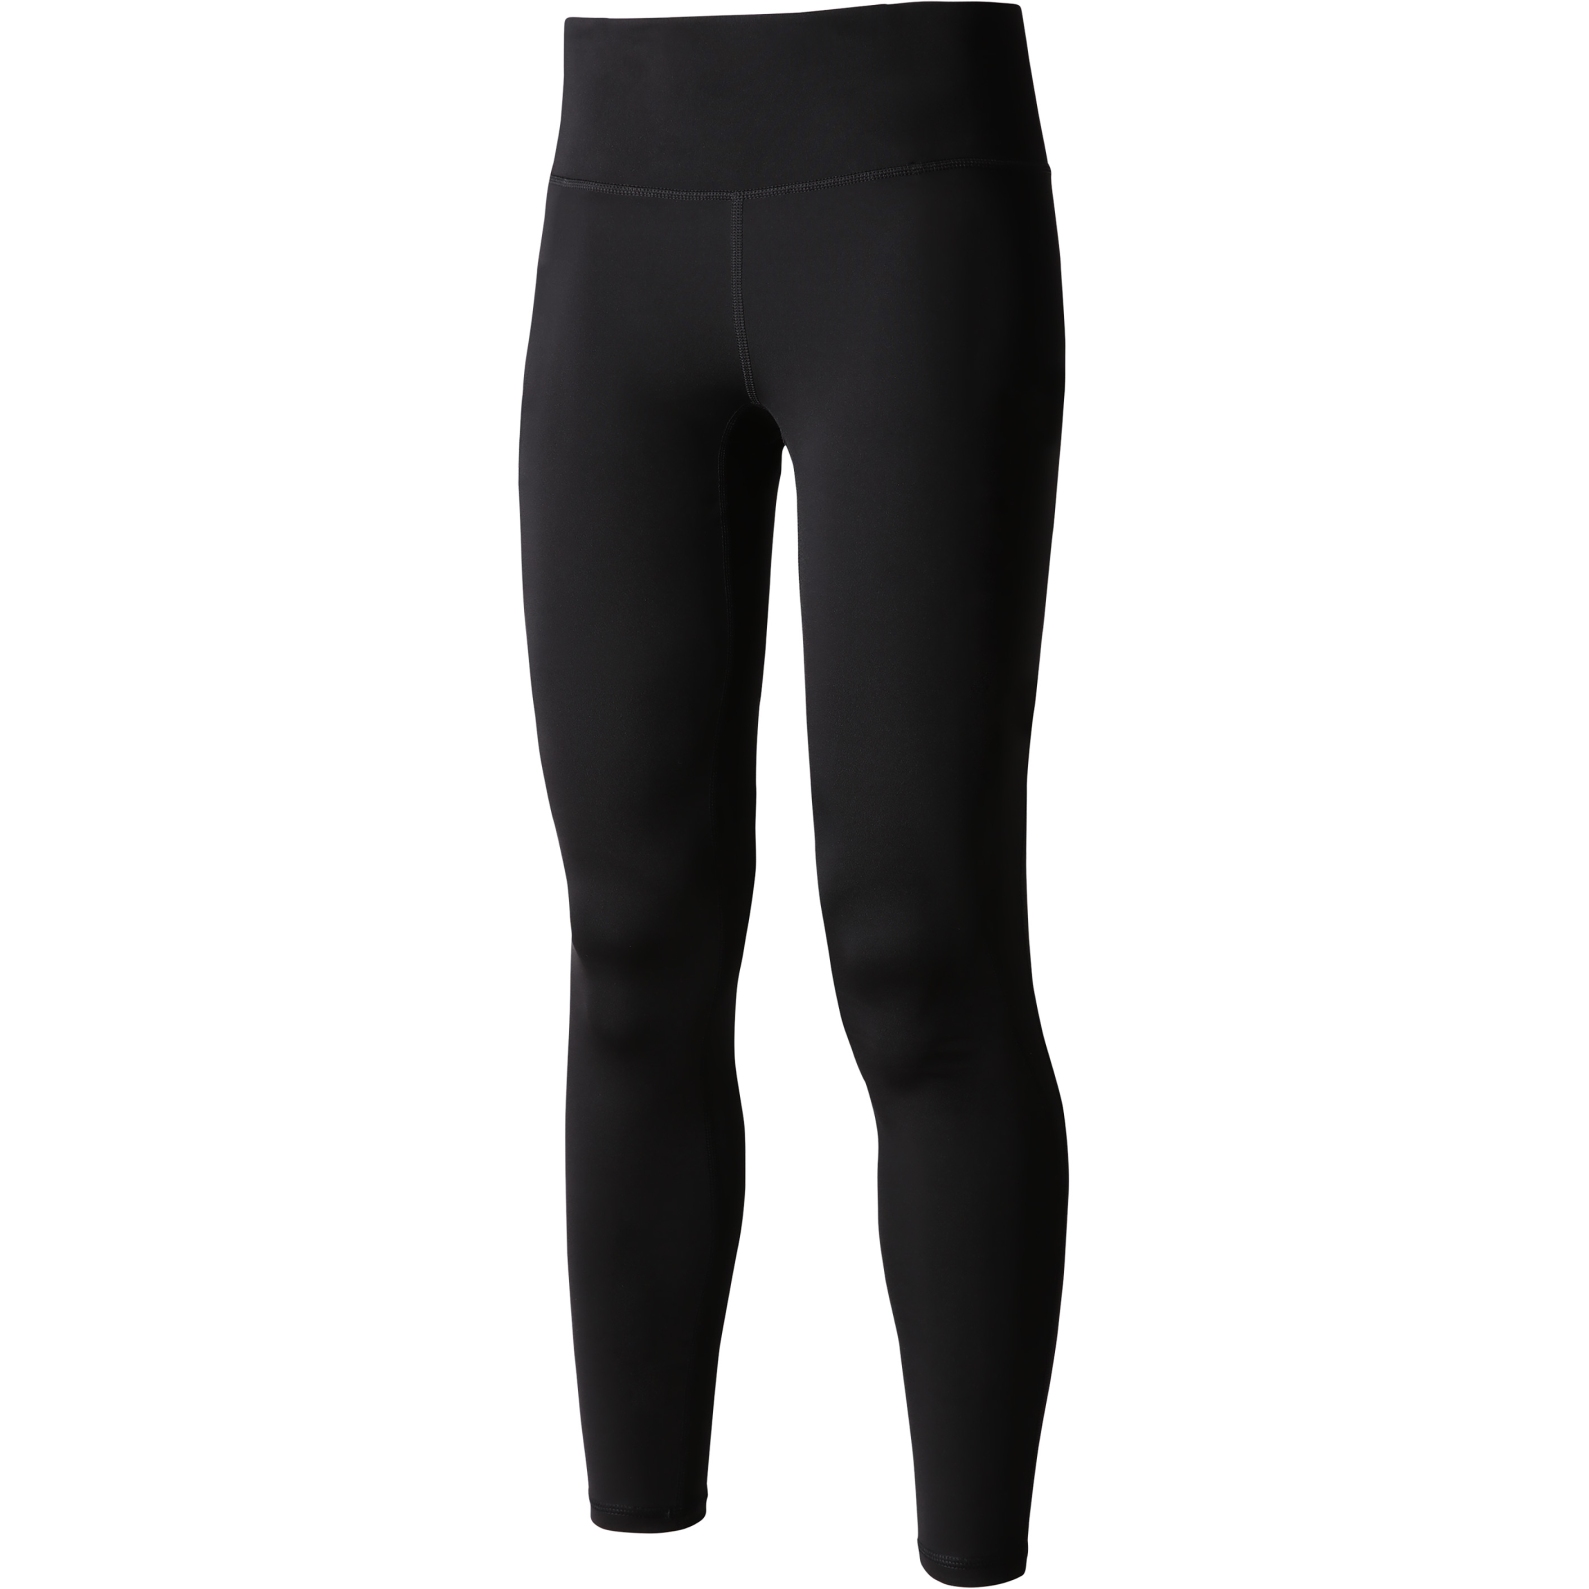 Women's The North Face Winter Warm Pro Tights